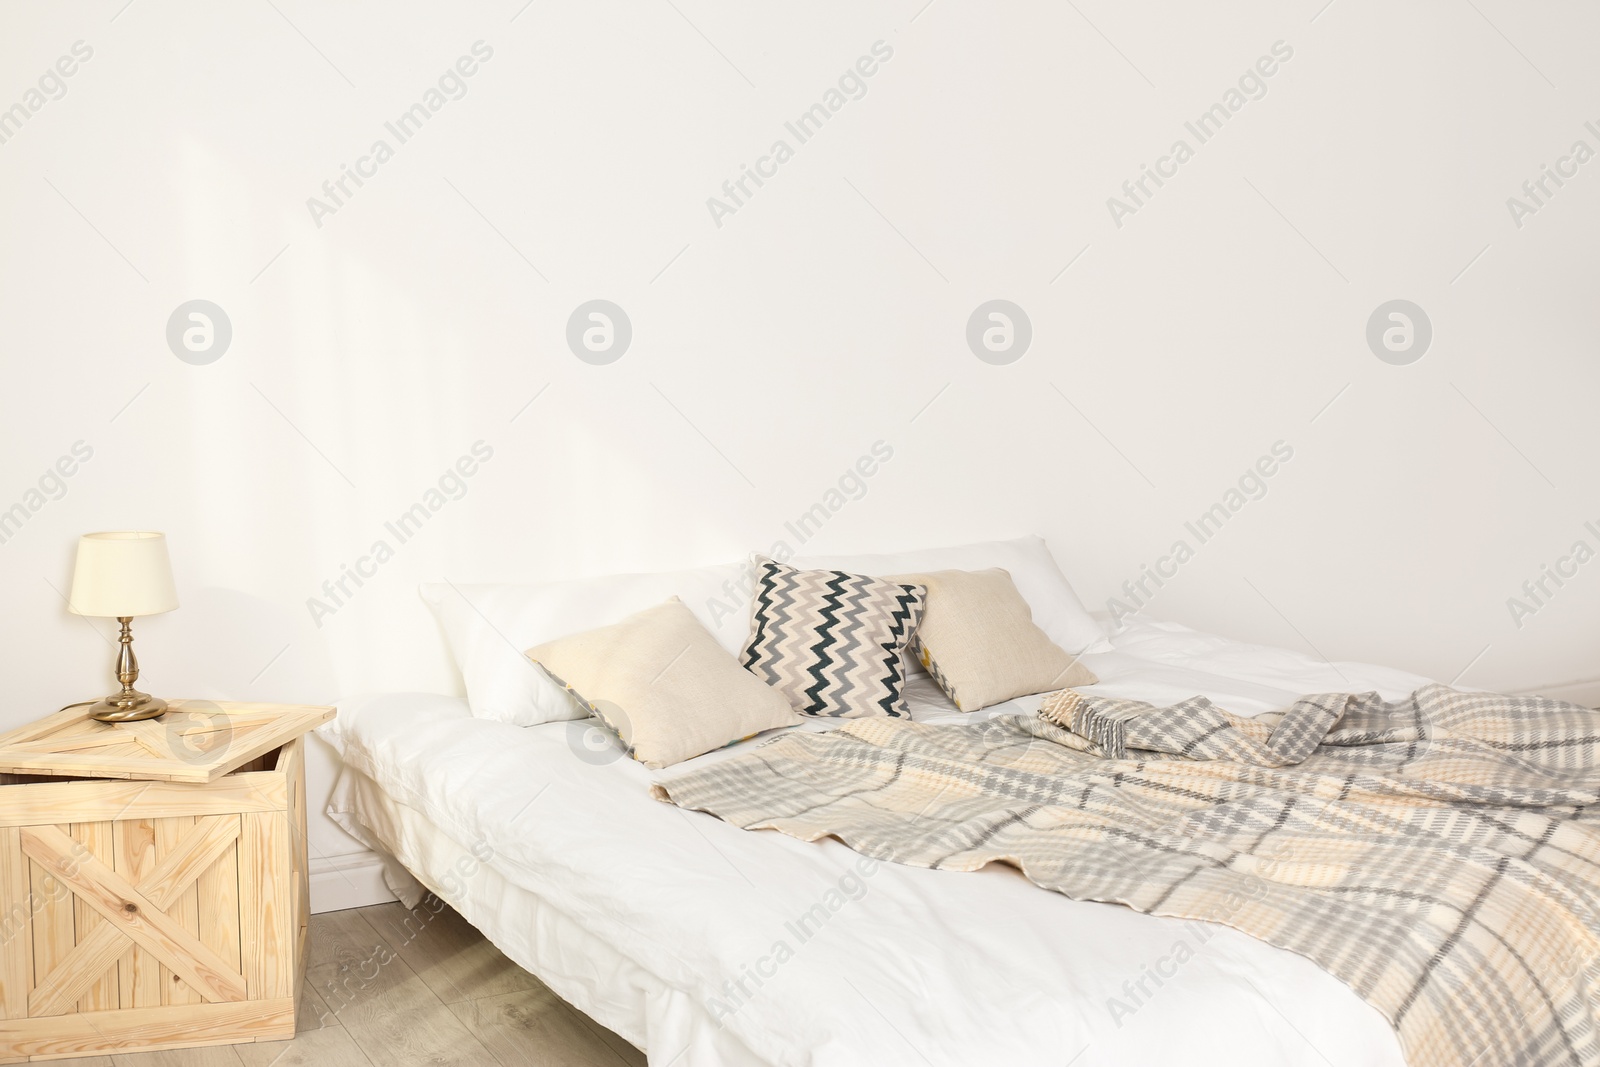 Photo of Bed with pillows and plaid in modern room interior